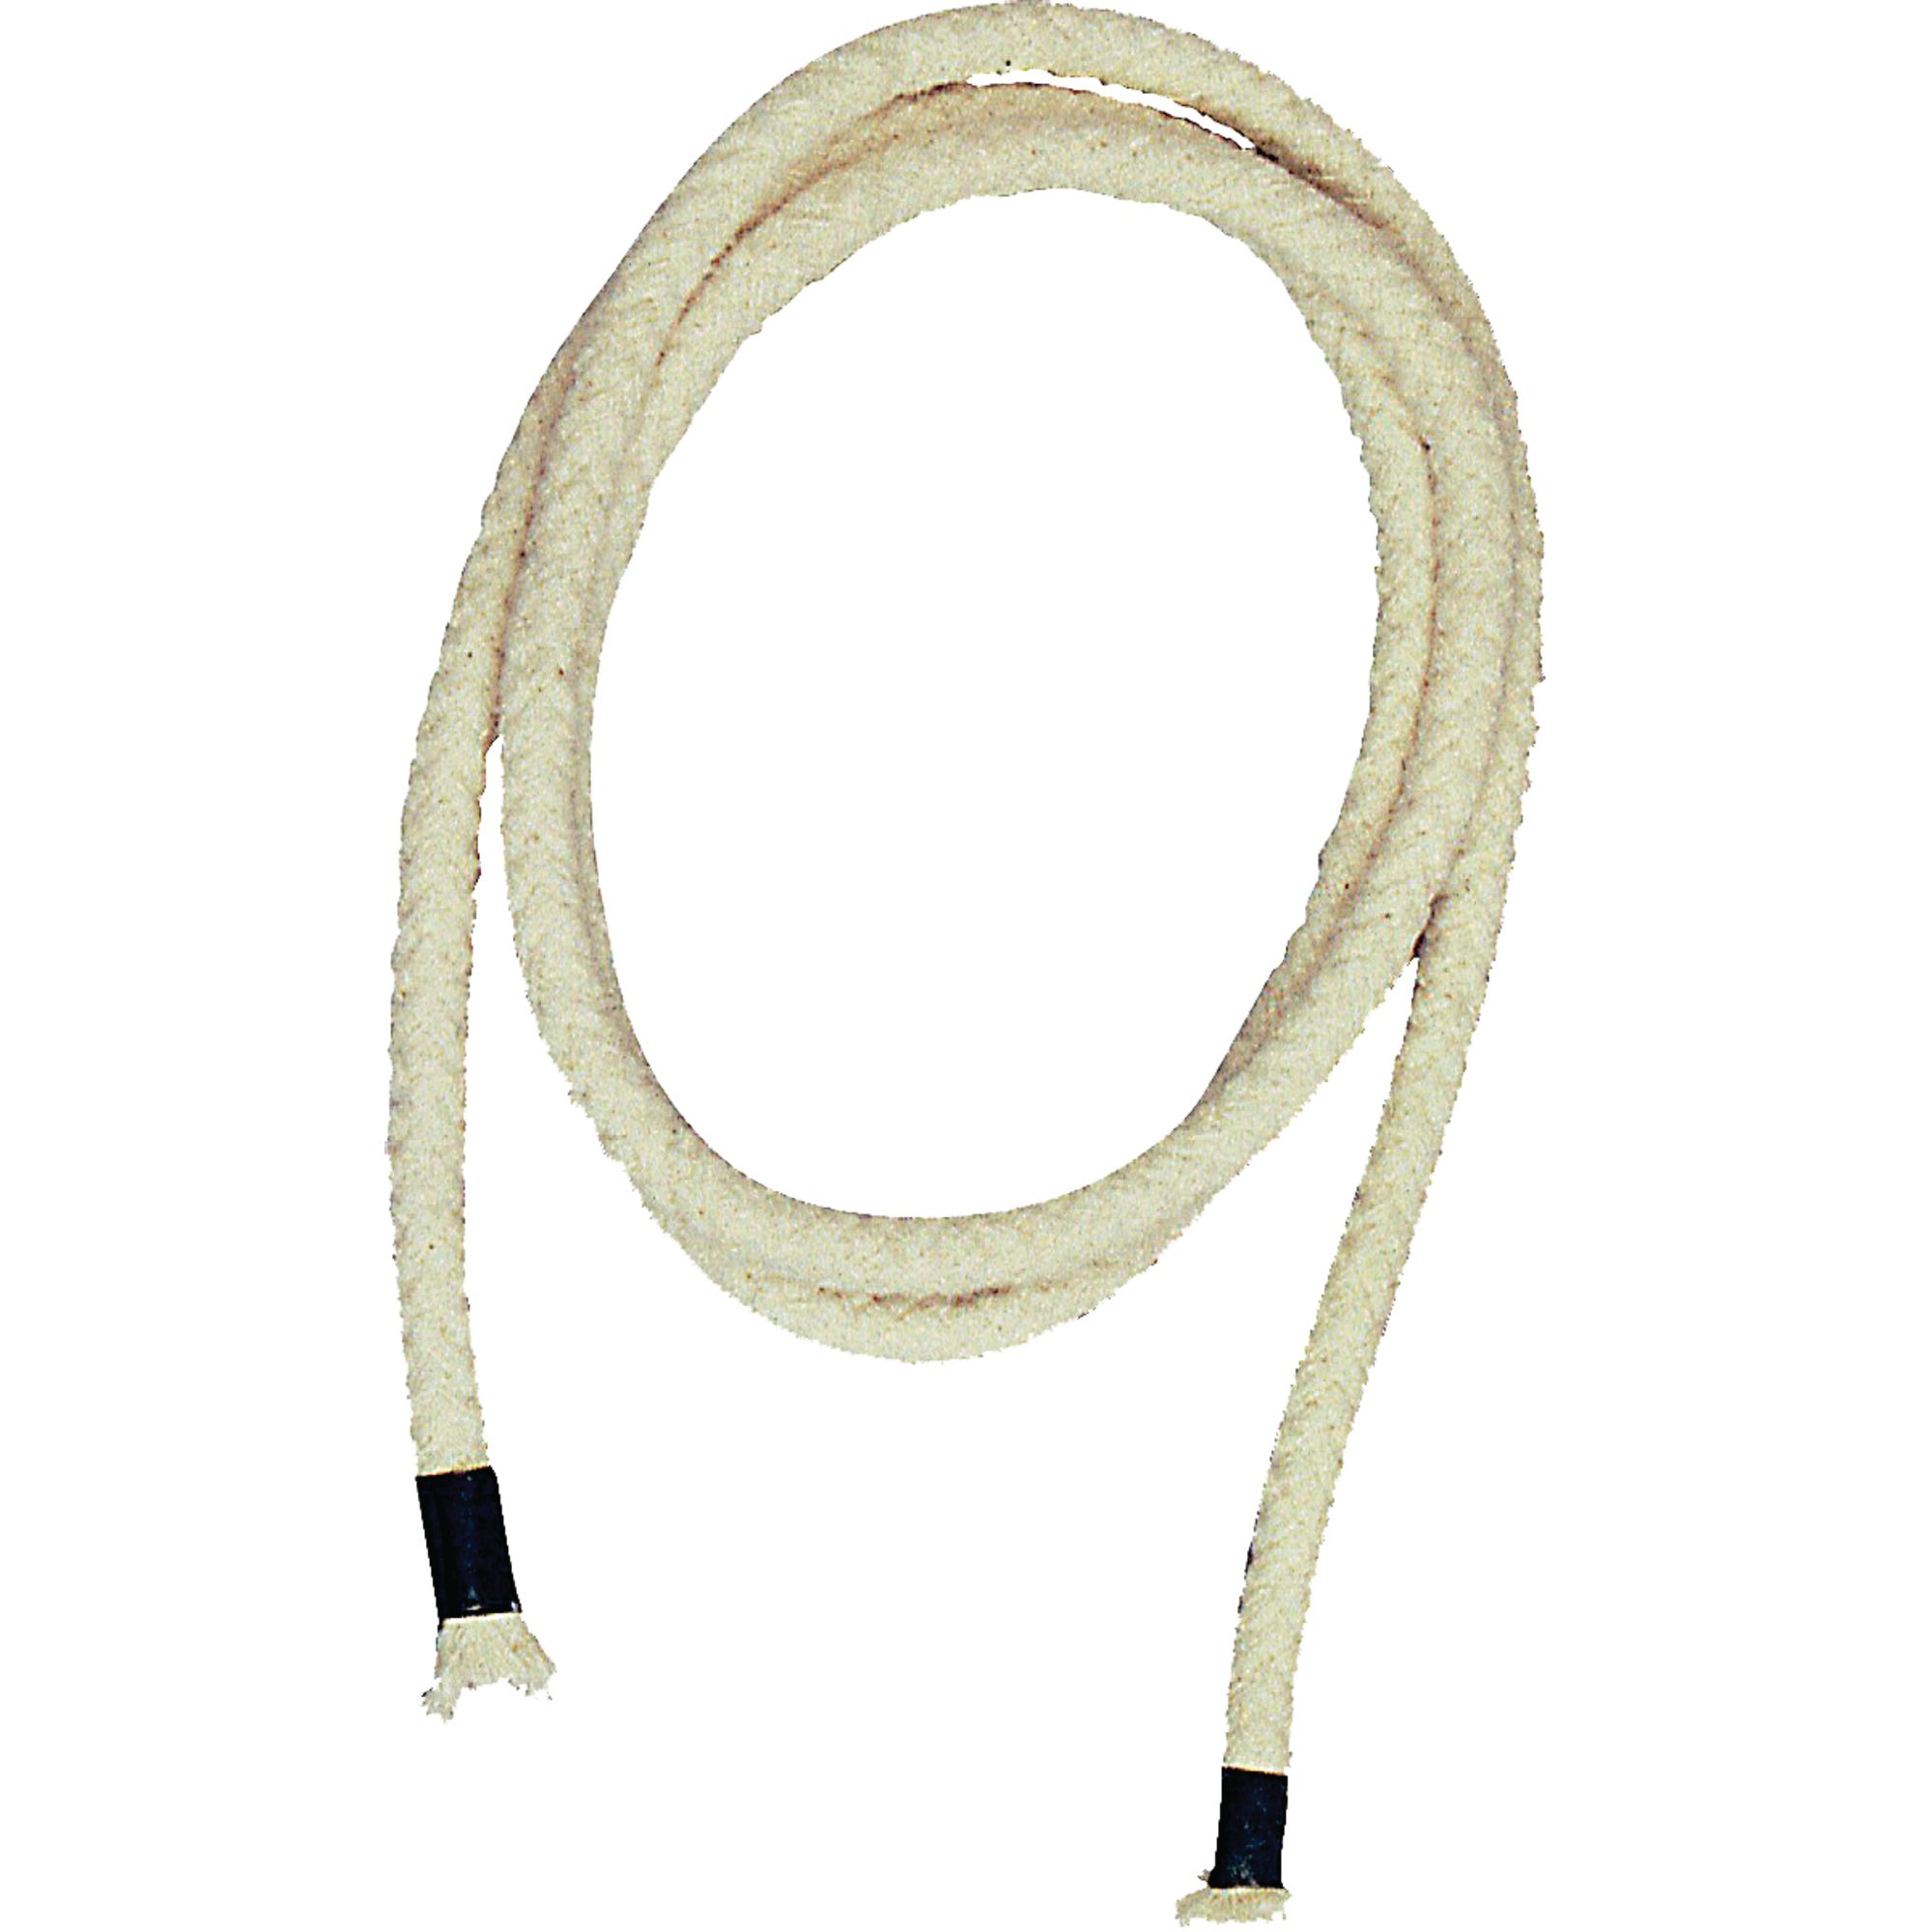 Cotton Skipping Rope - 9ft